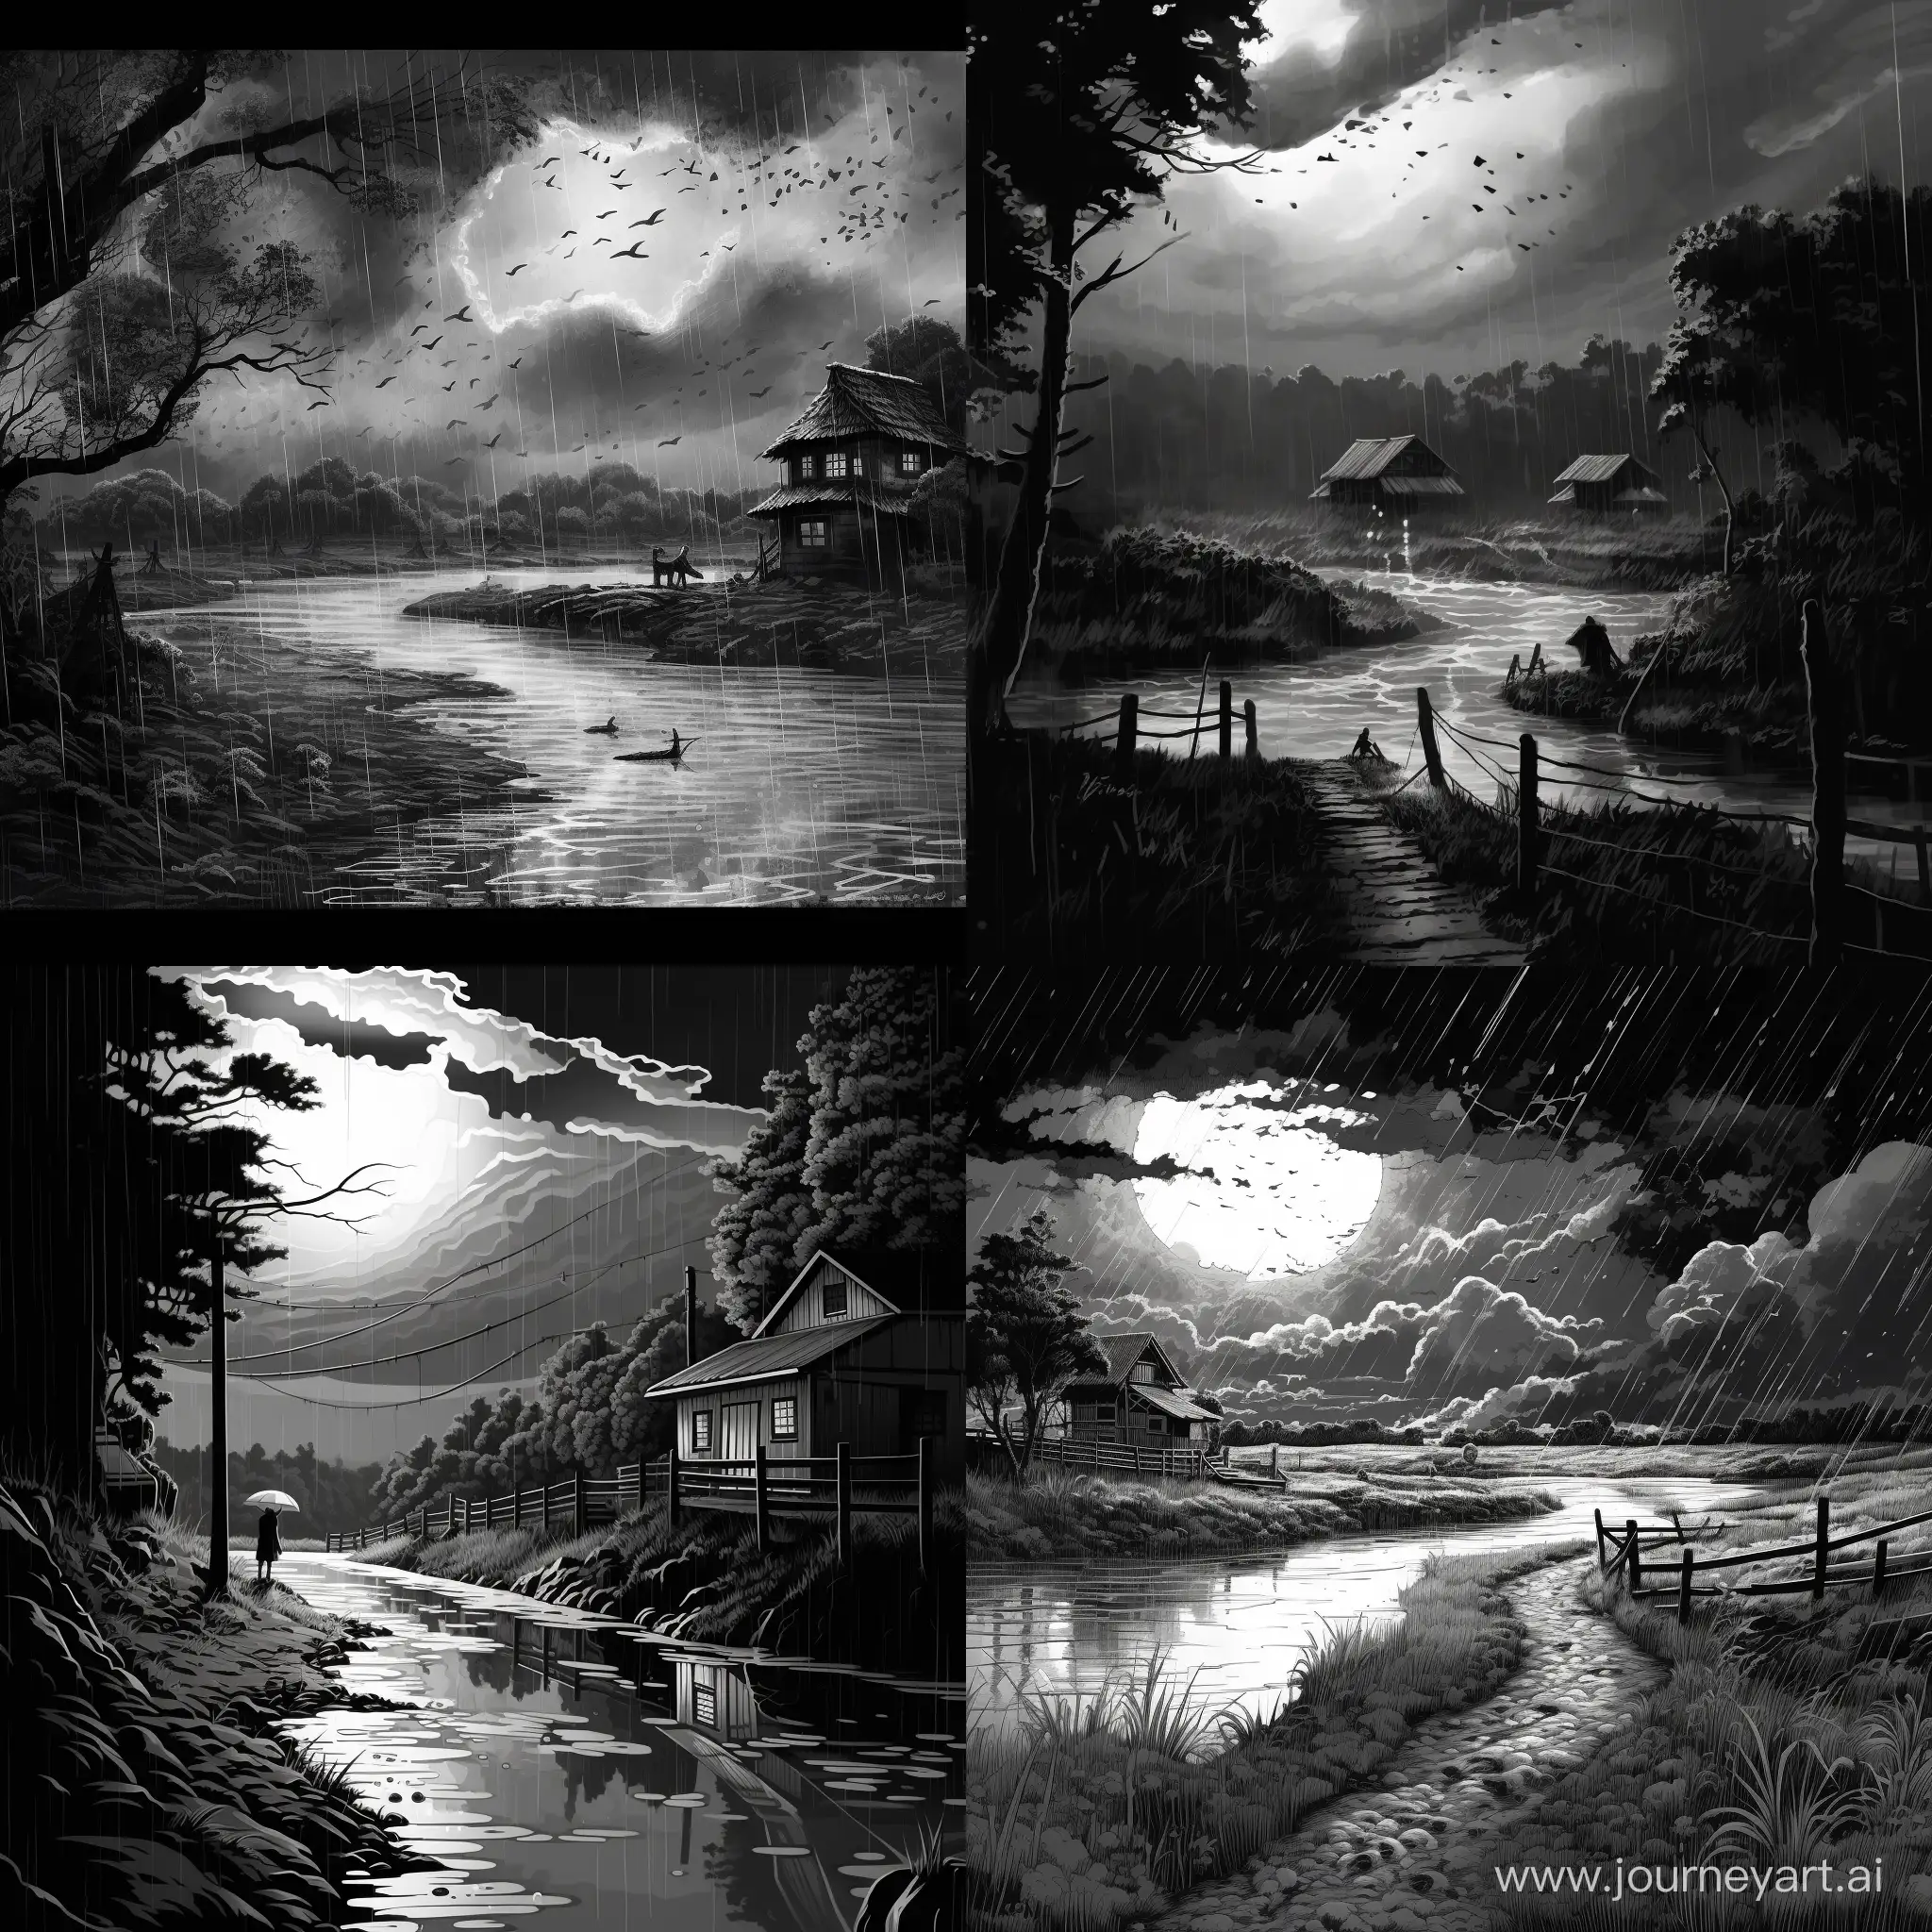 It started to rain heavily in landscapes near river in manga style black and white